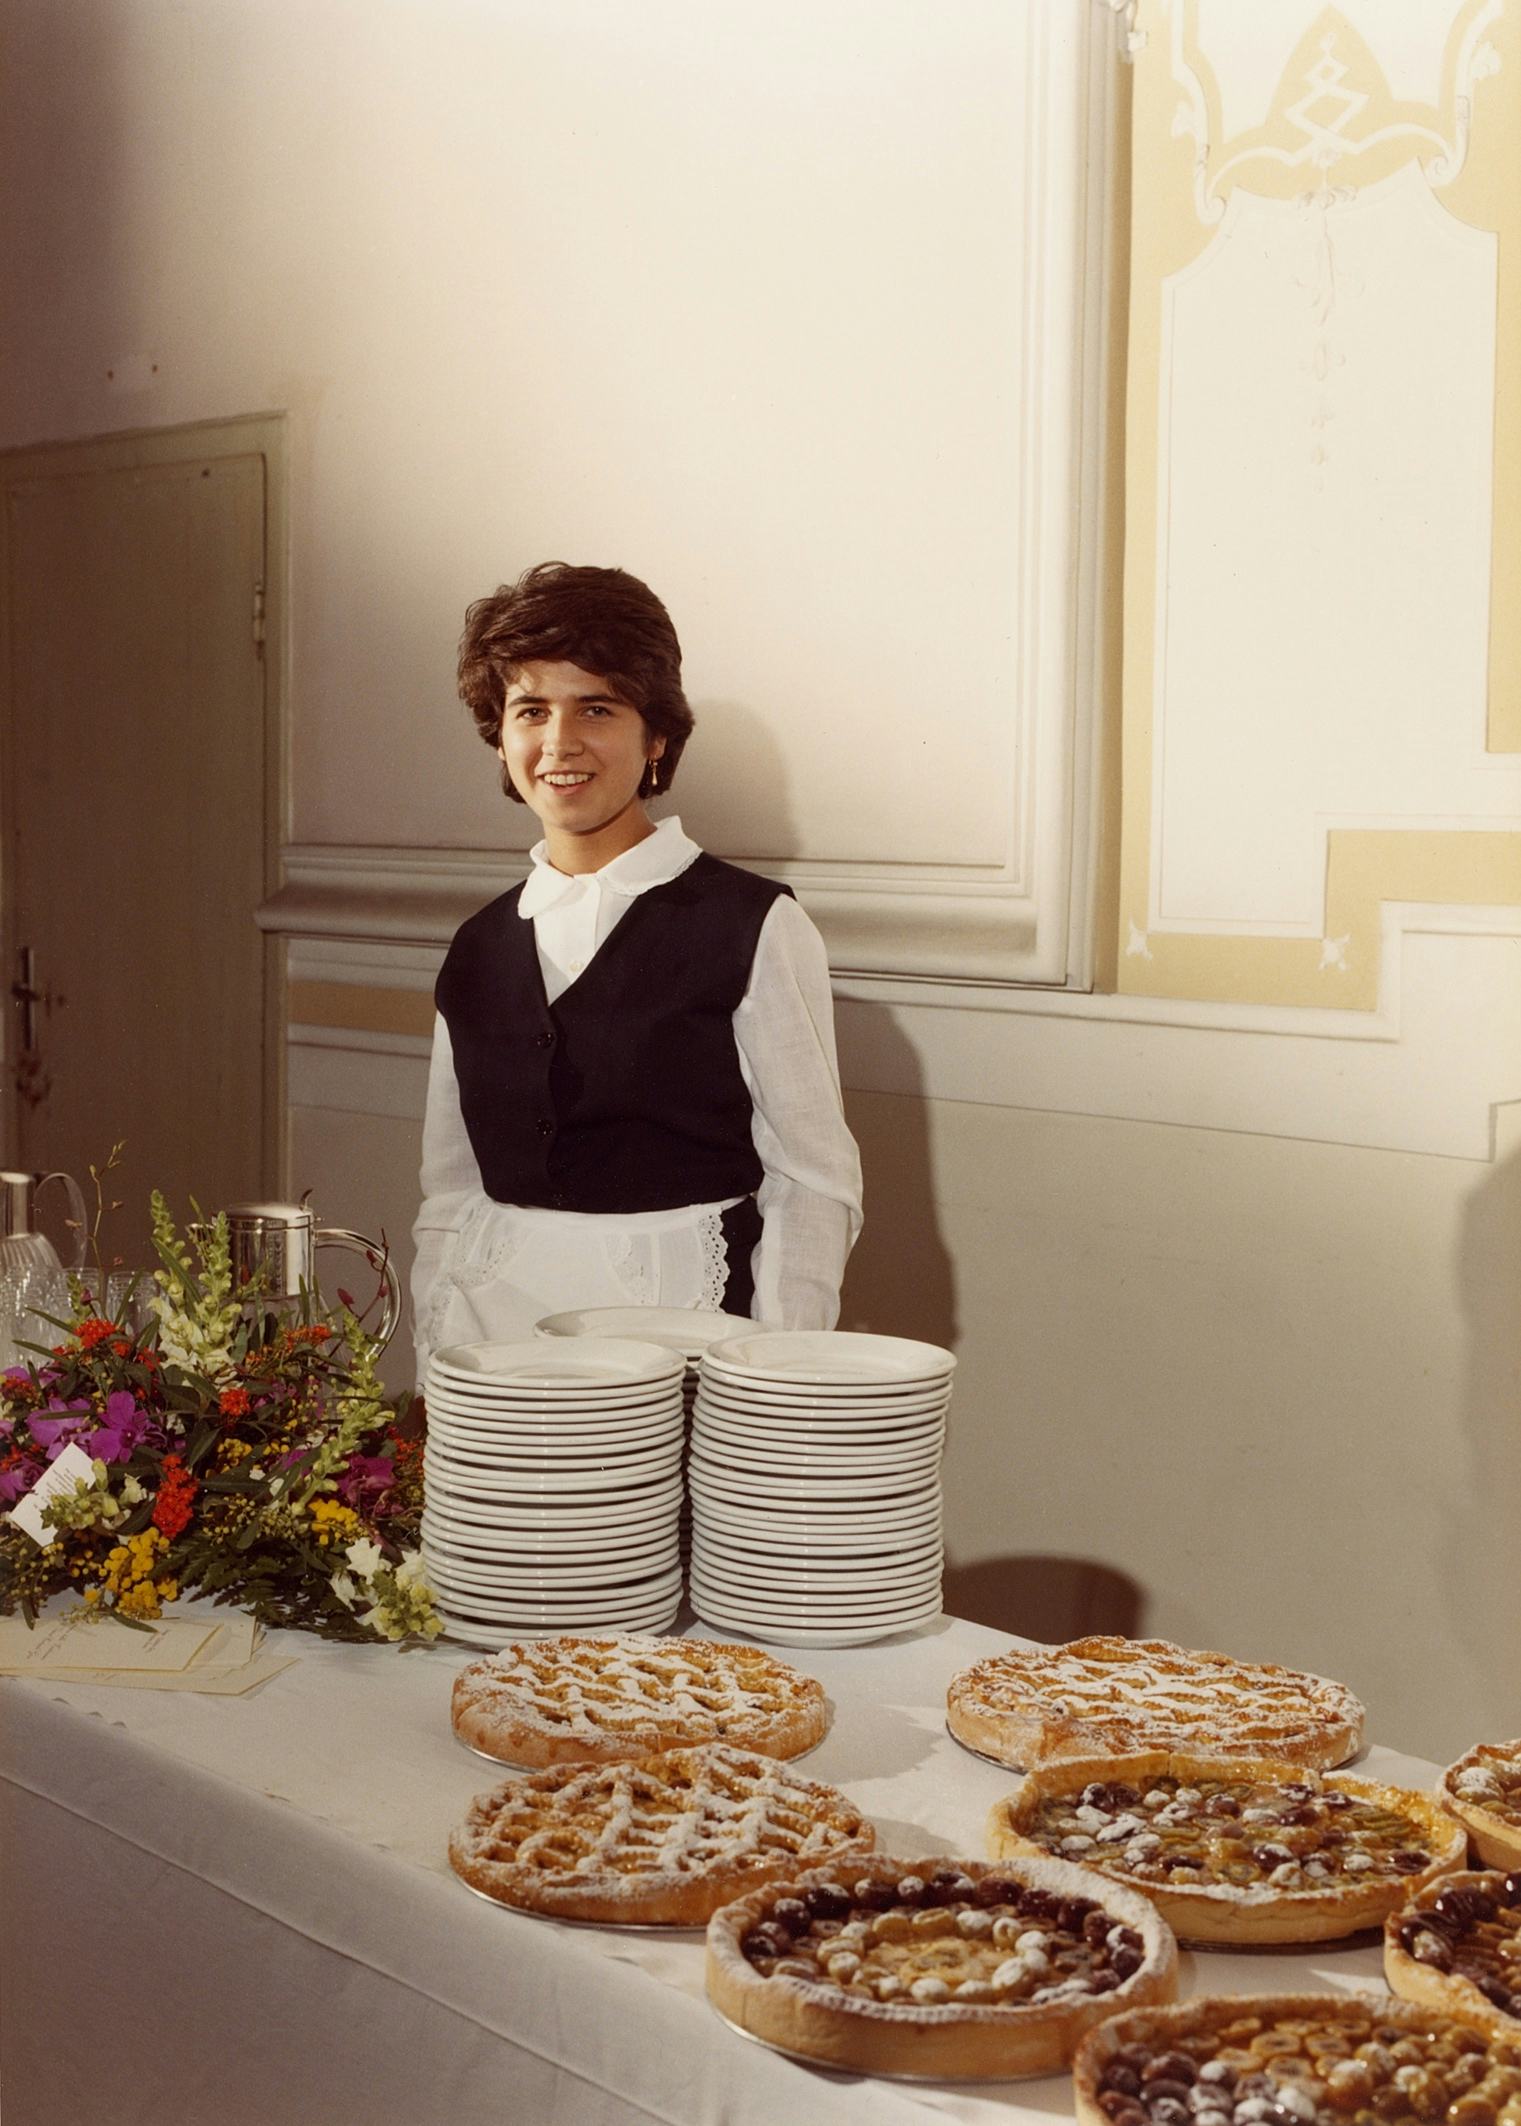 Archival image of the artist's mother, as a waitress, standing behind a table full of flowers, plates and pies. © Eleonora Agostini